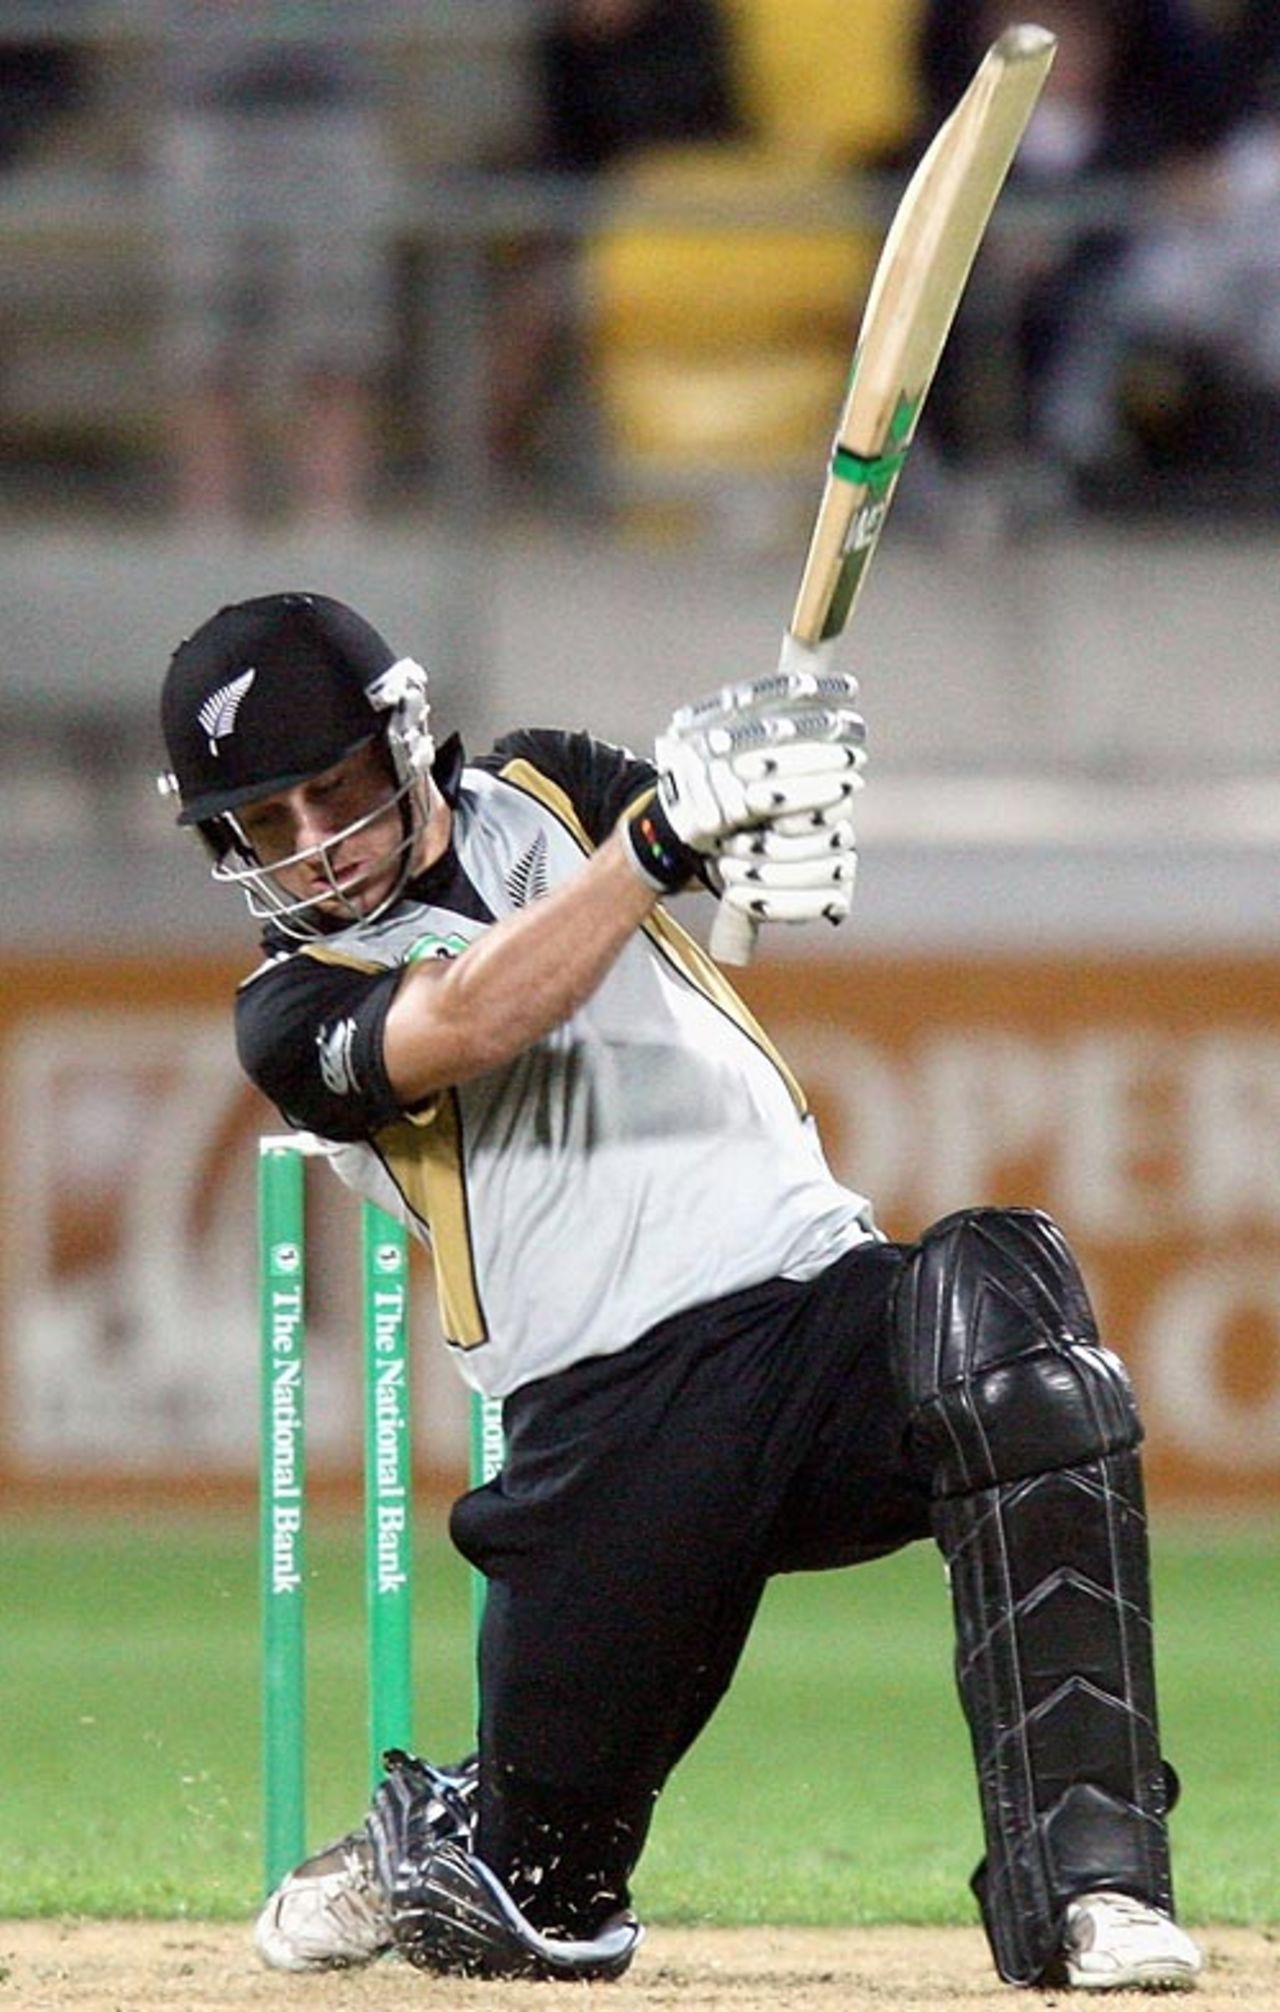 Nathan McCullum gets down on one knee to punch the ball through the off side, New Zealand v India, 2nd Twenty20 international, Wellington, February 27, 2009